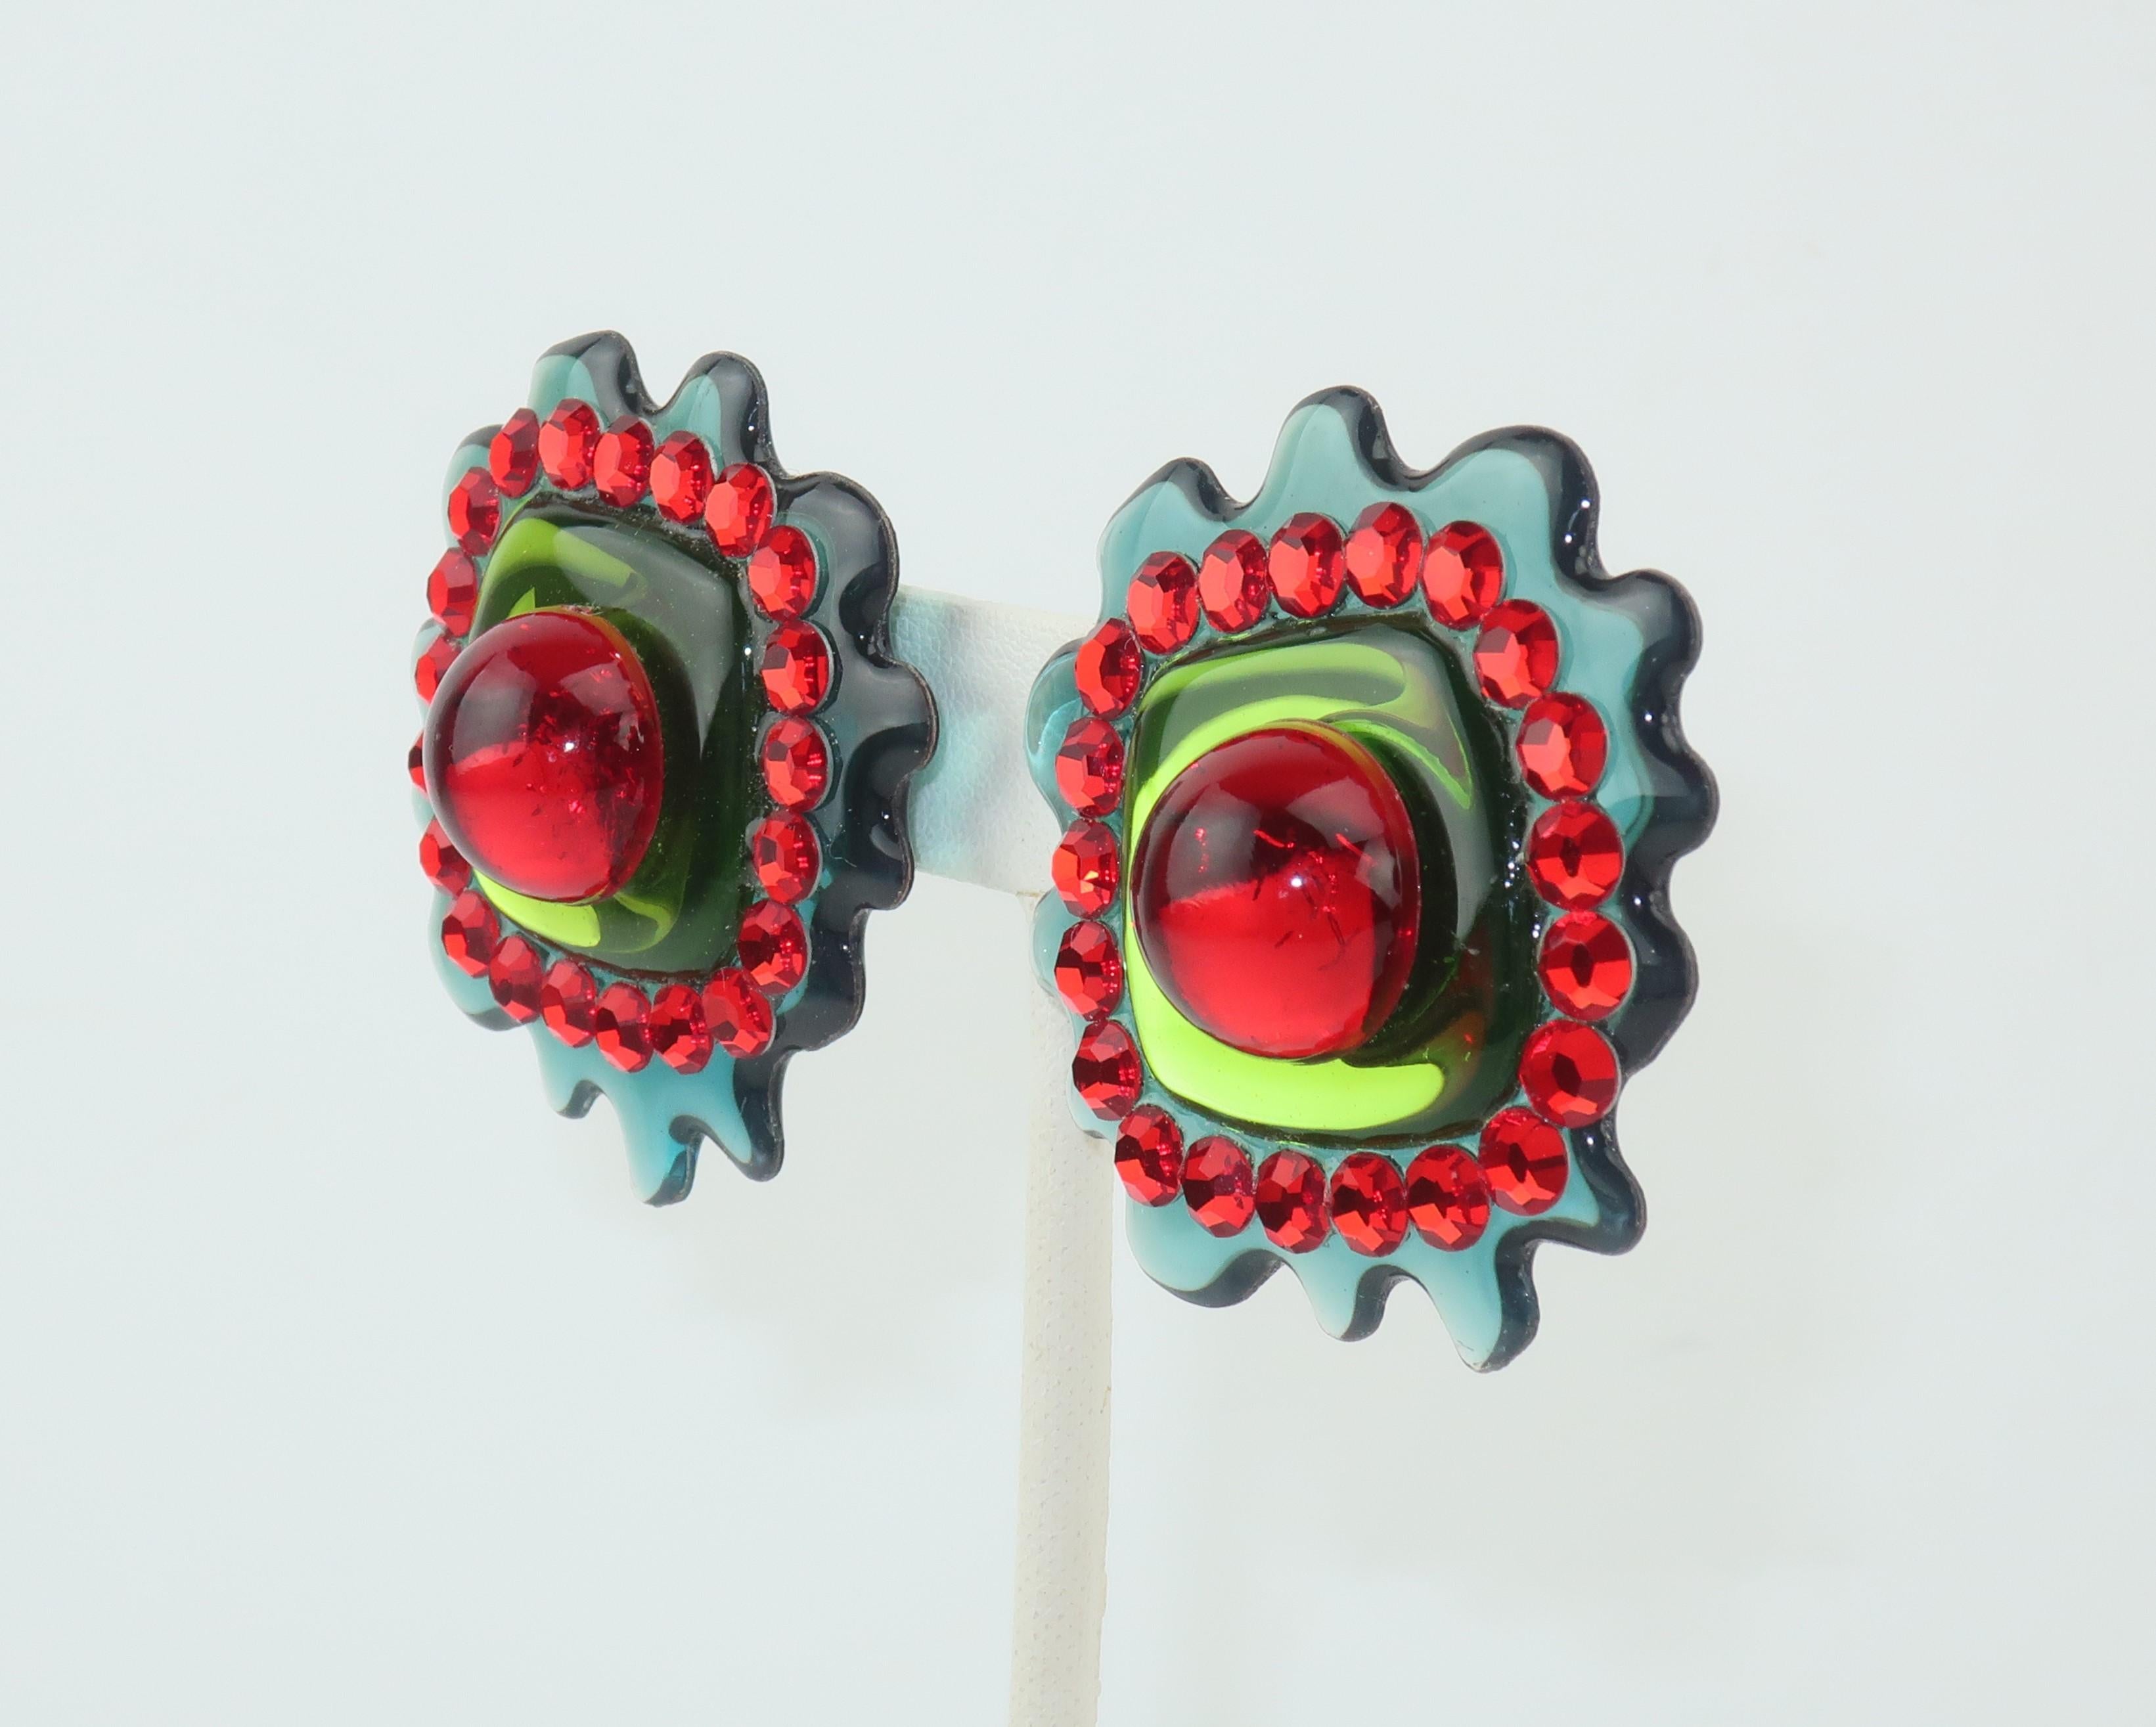 These fun 1980’s clip on earrings are an explosion of color with a great pop art style reminiscent of Roy Lichtenstein graphics.  A sea mist green amoeba base serves as a frame to a ring of red pave crystals and a spring green center accented with a